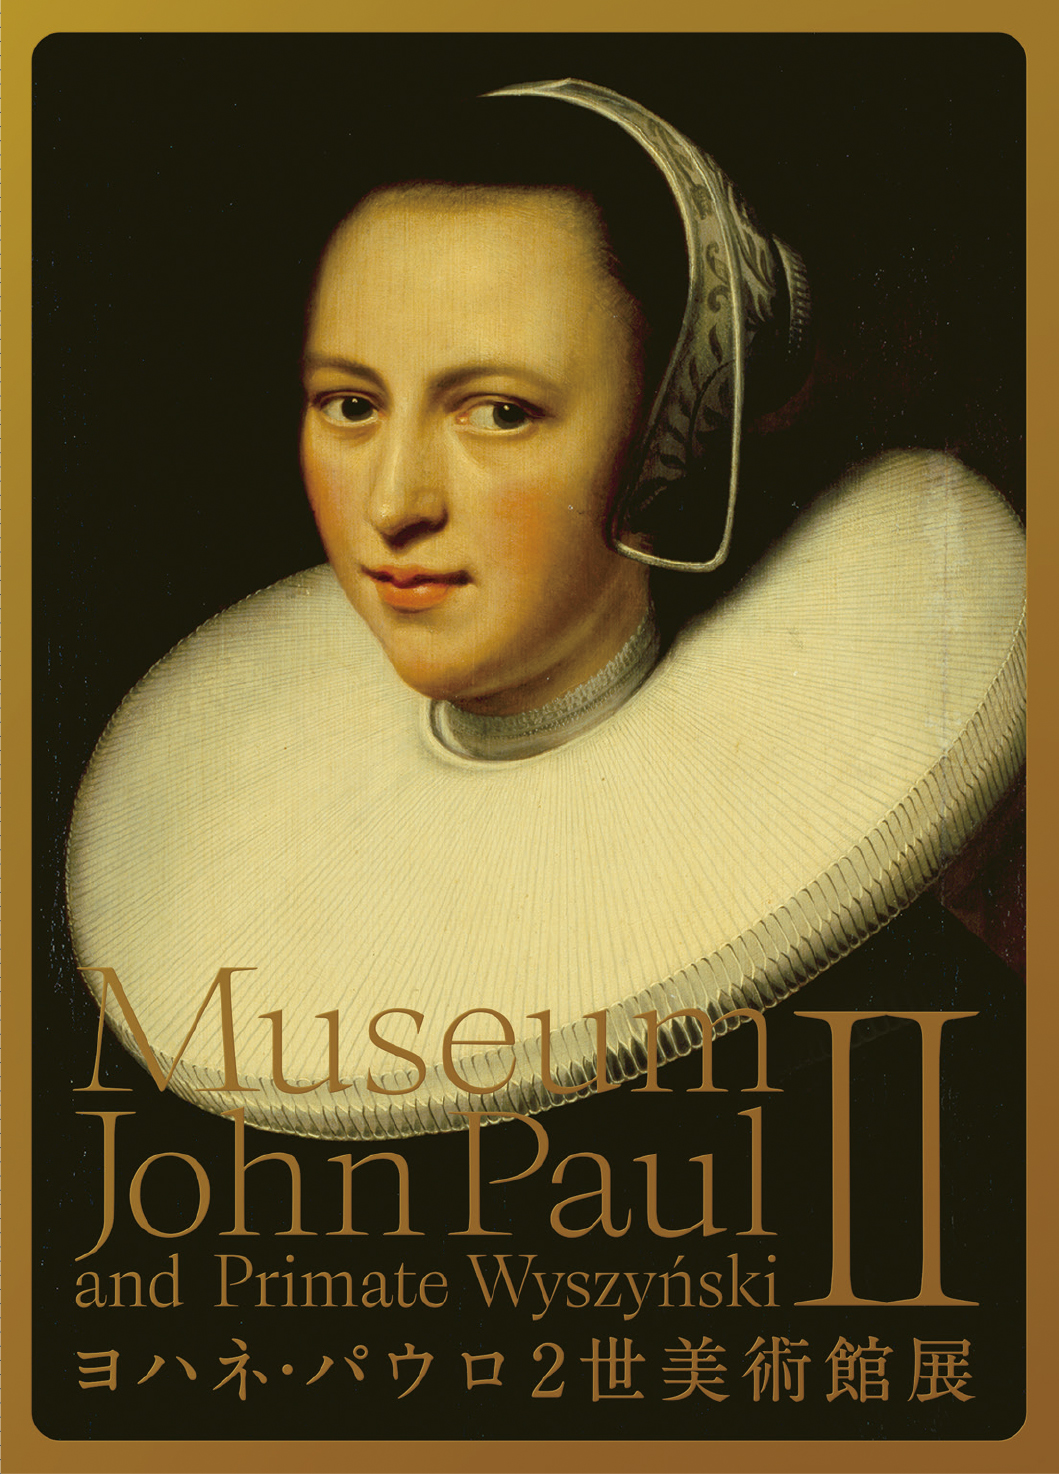 COLLECTION FROM THE MUSEUM OF JOHN PAULⅡ AND PARIMATE WYSZYŃSKI